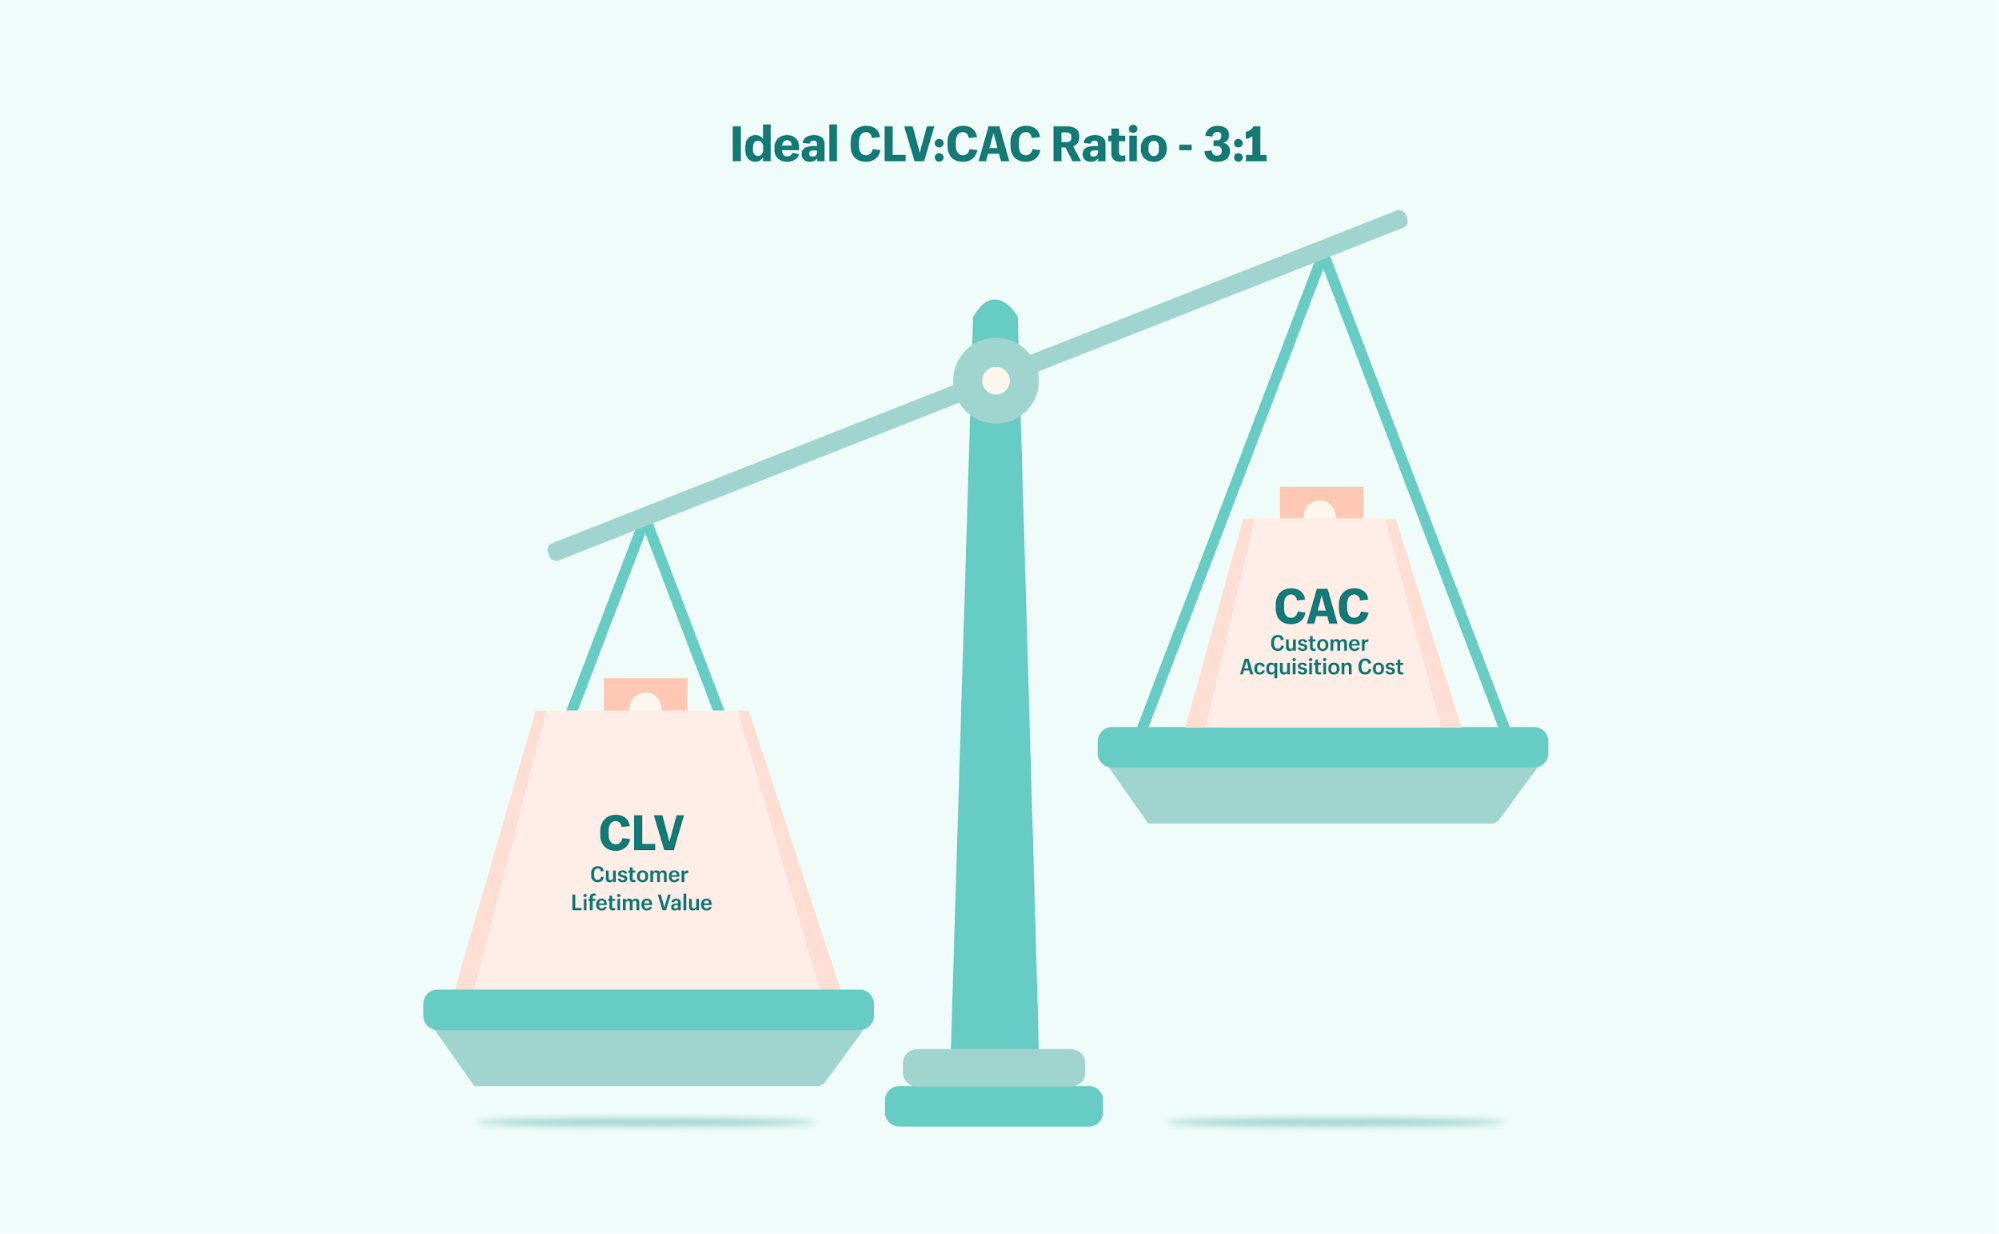 The ideal CLV to CAC ratio is 3:1, visualized with a scale graphic